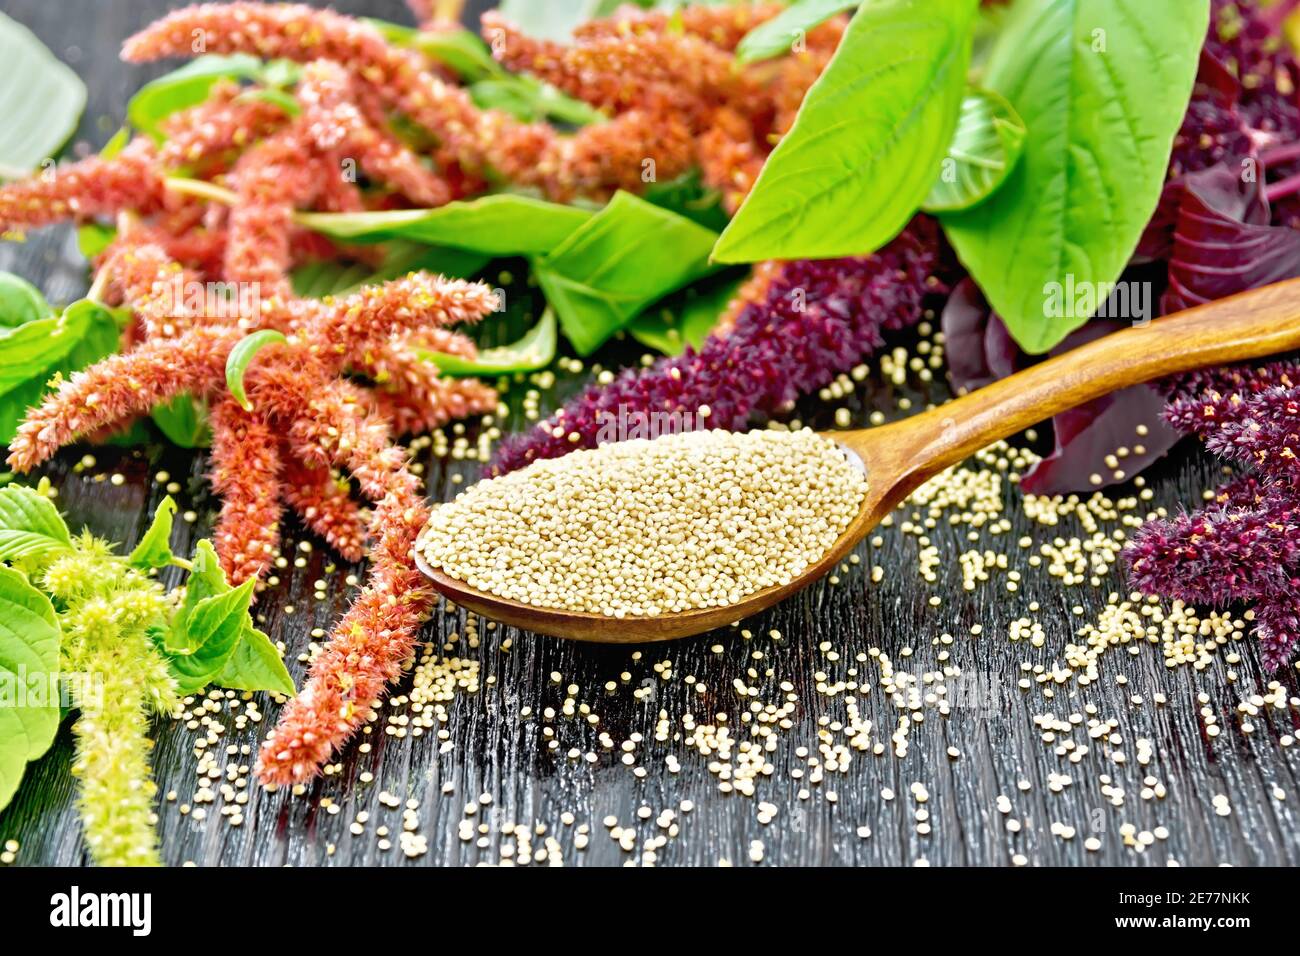 Amaranth groats in a spoon, burgundy, green and red inflorescences with leaves on a wooden board background Stock Photo